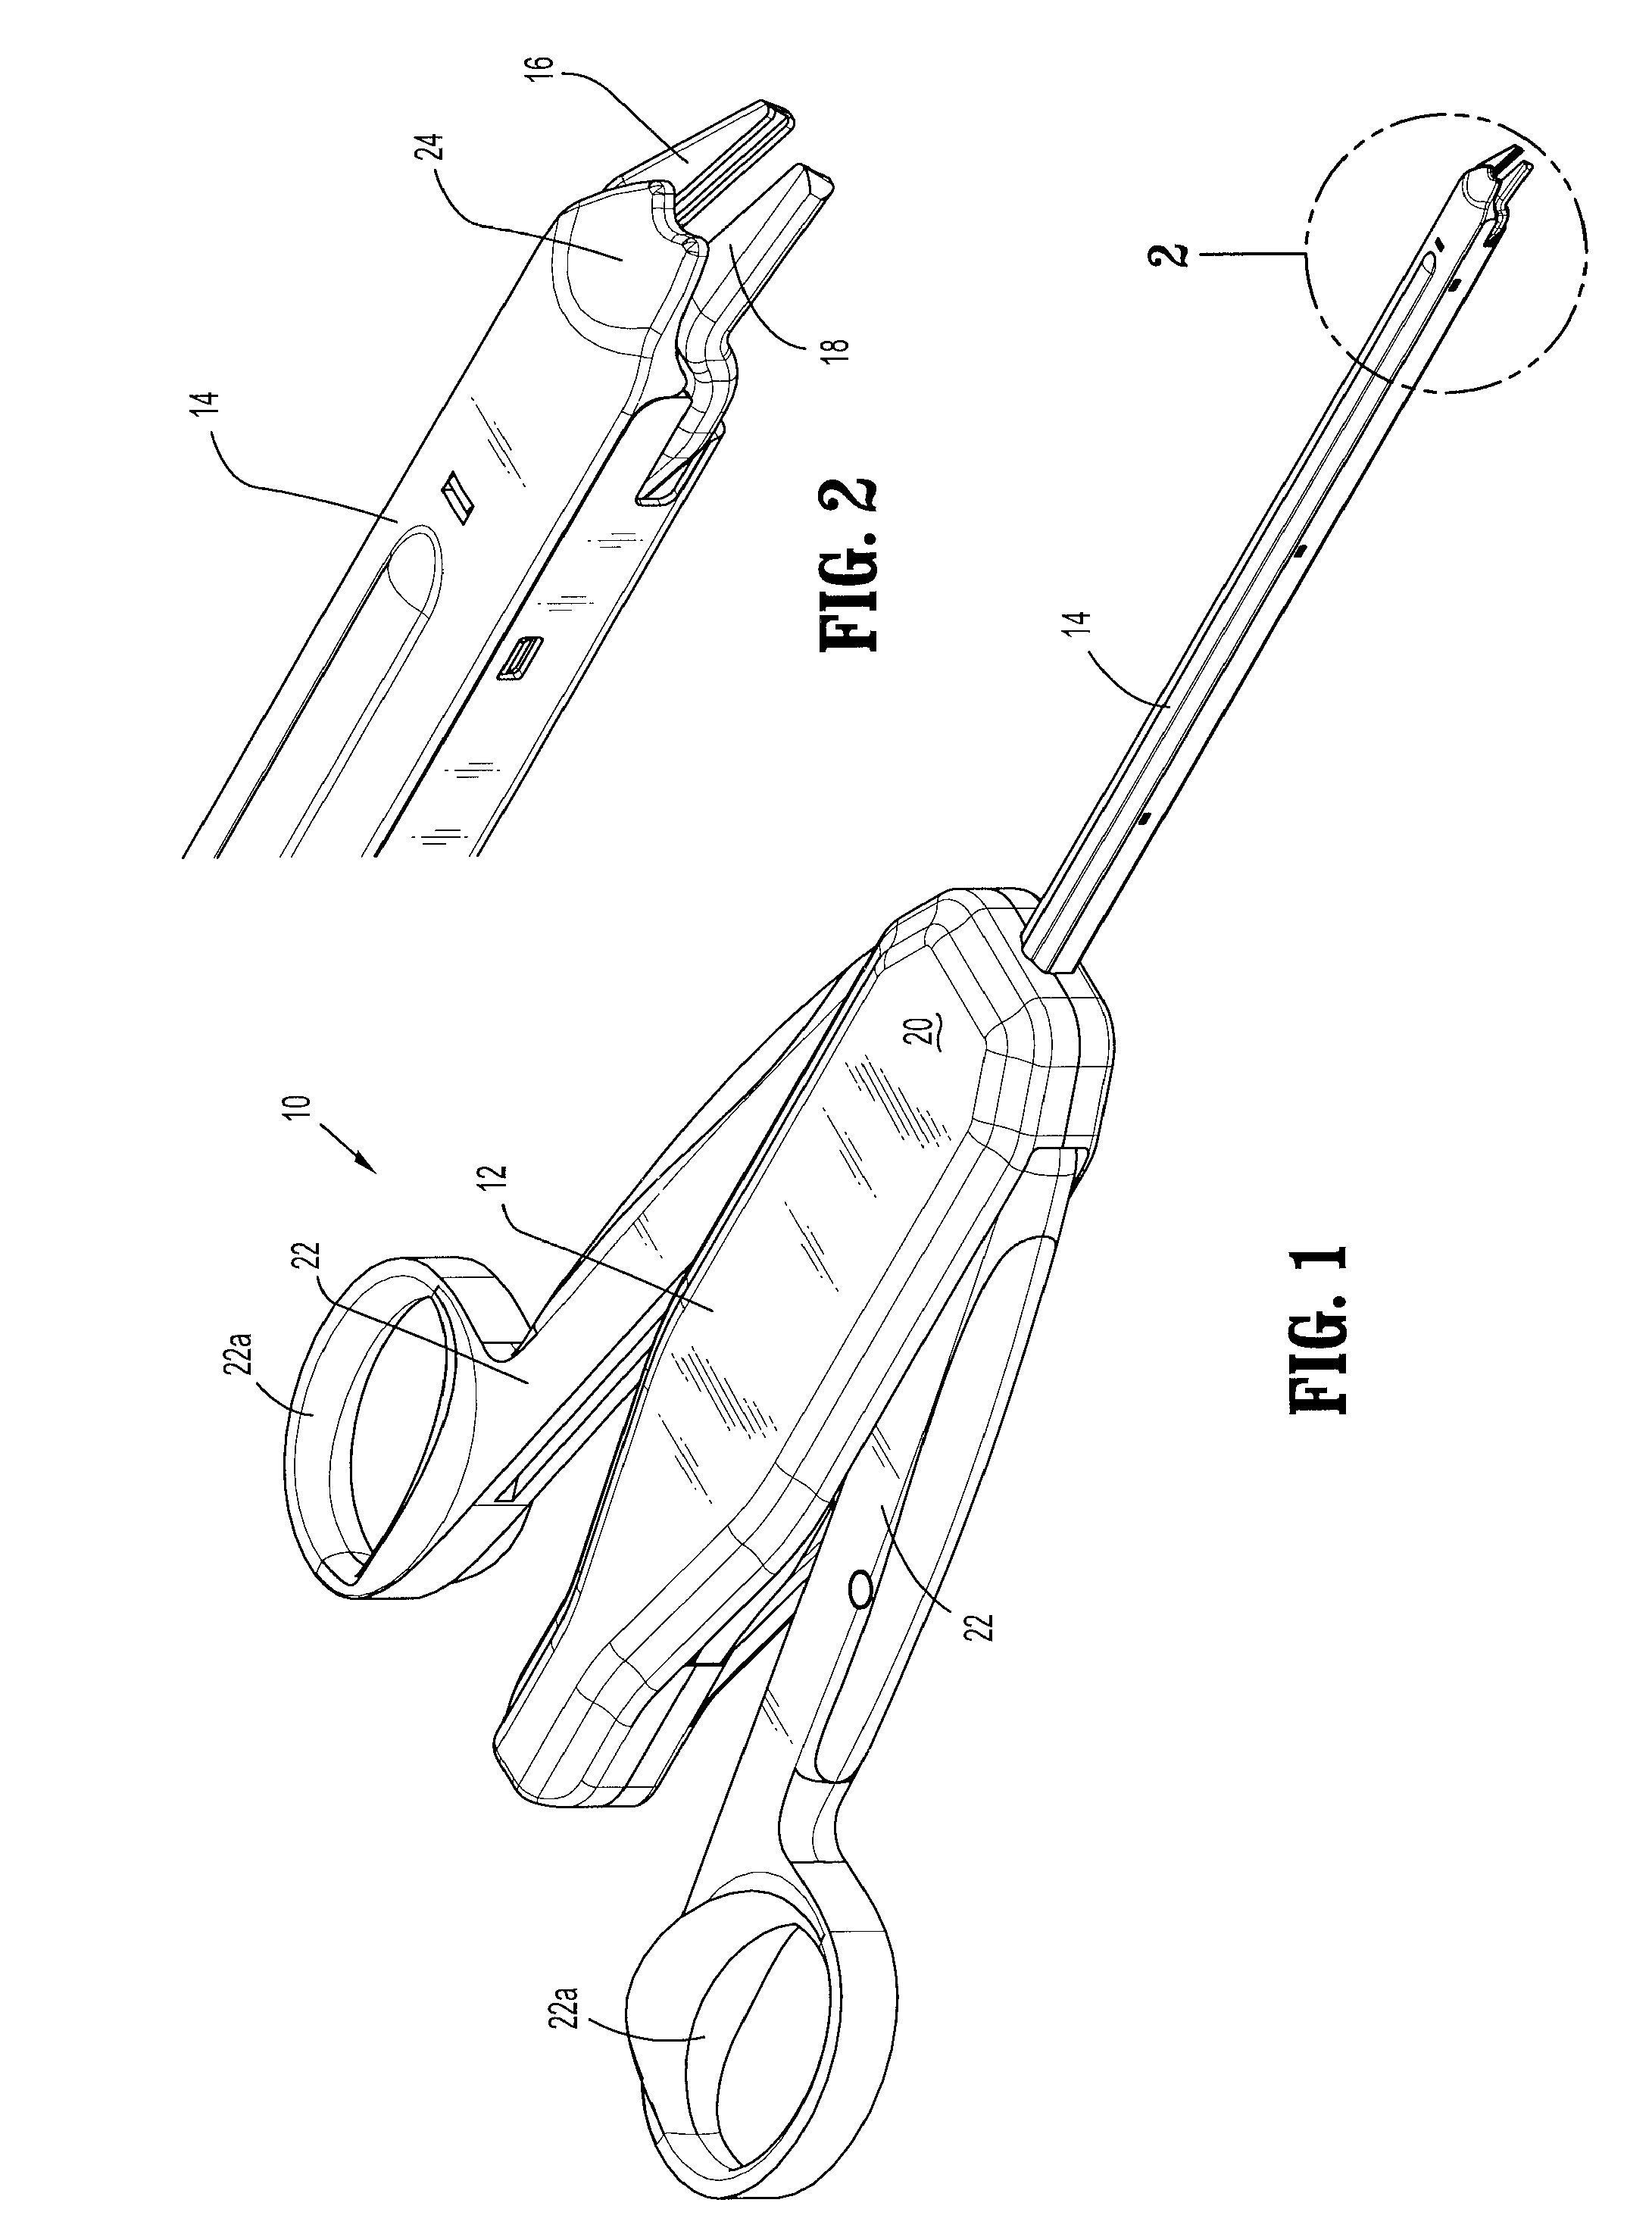 Apparatus for applying surgical clips